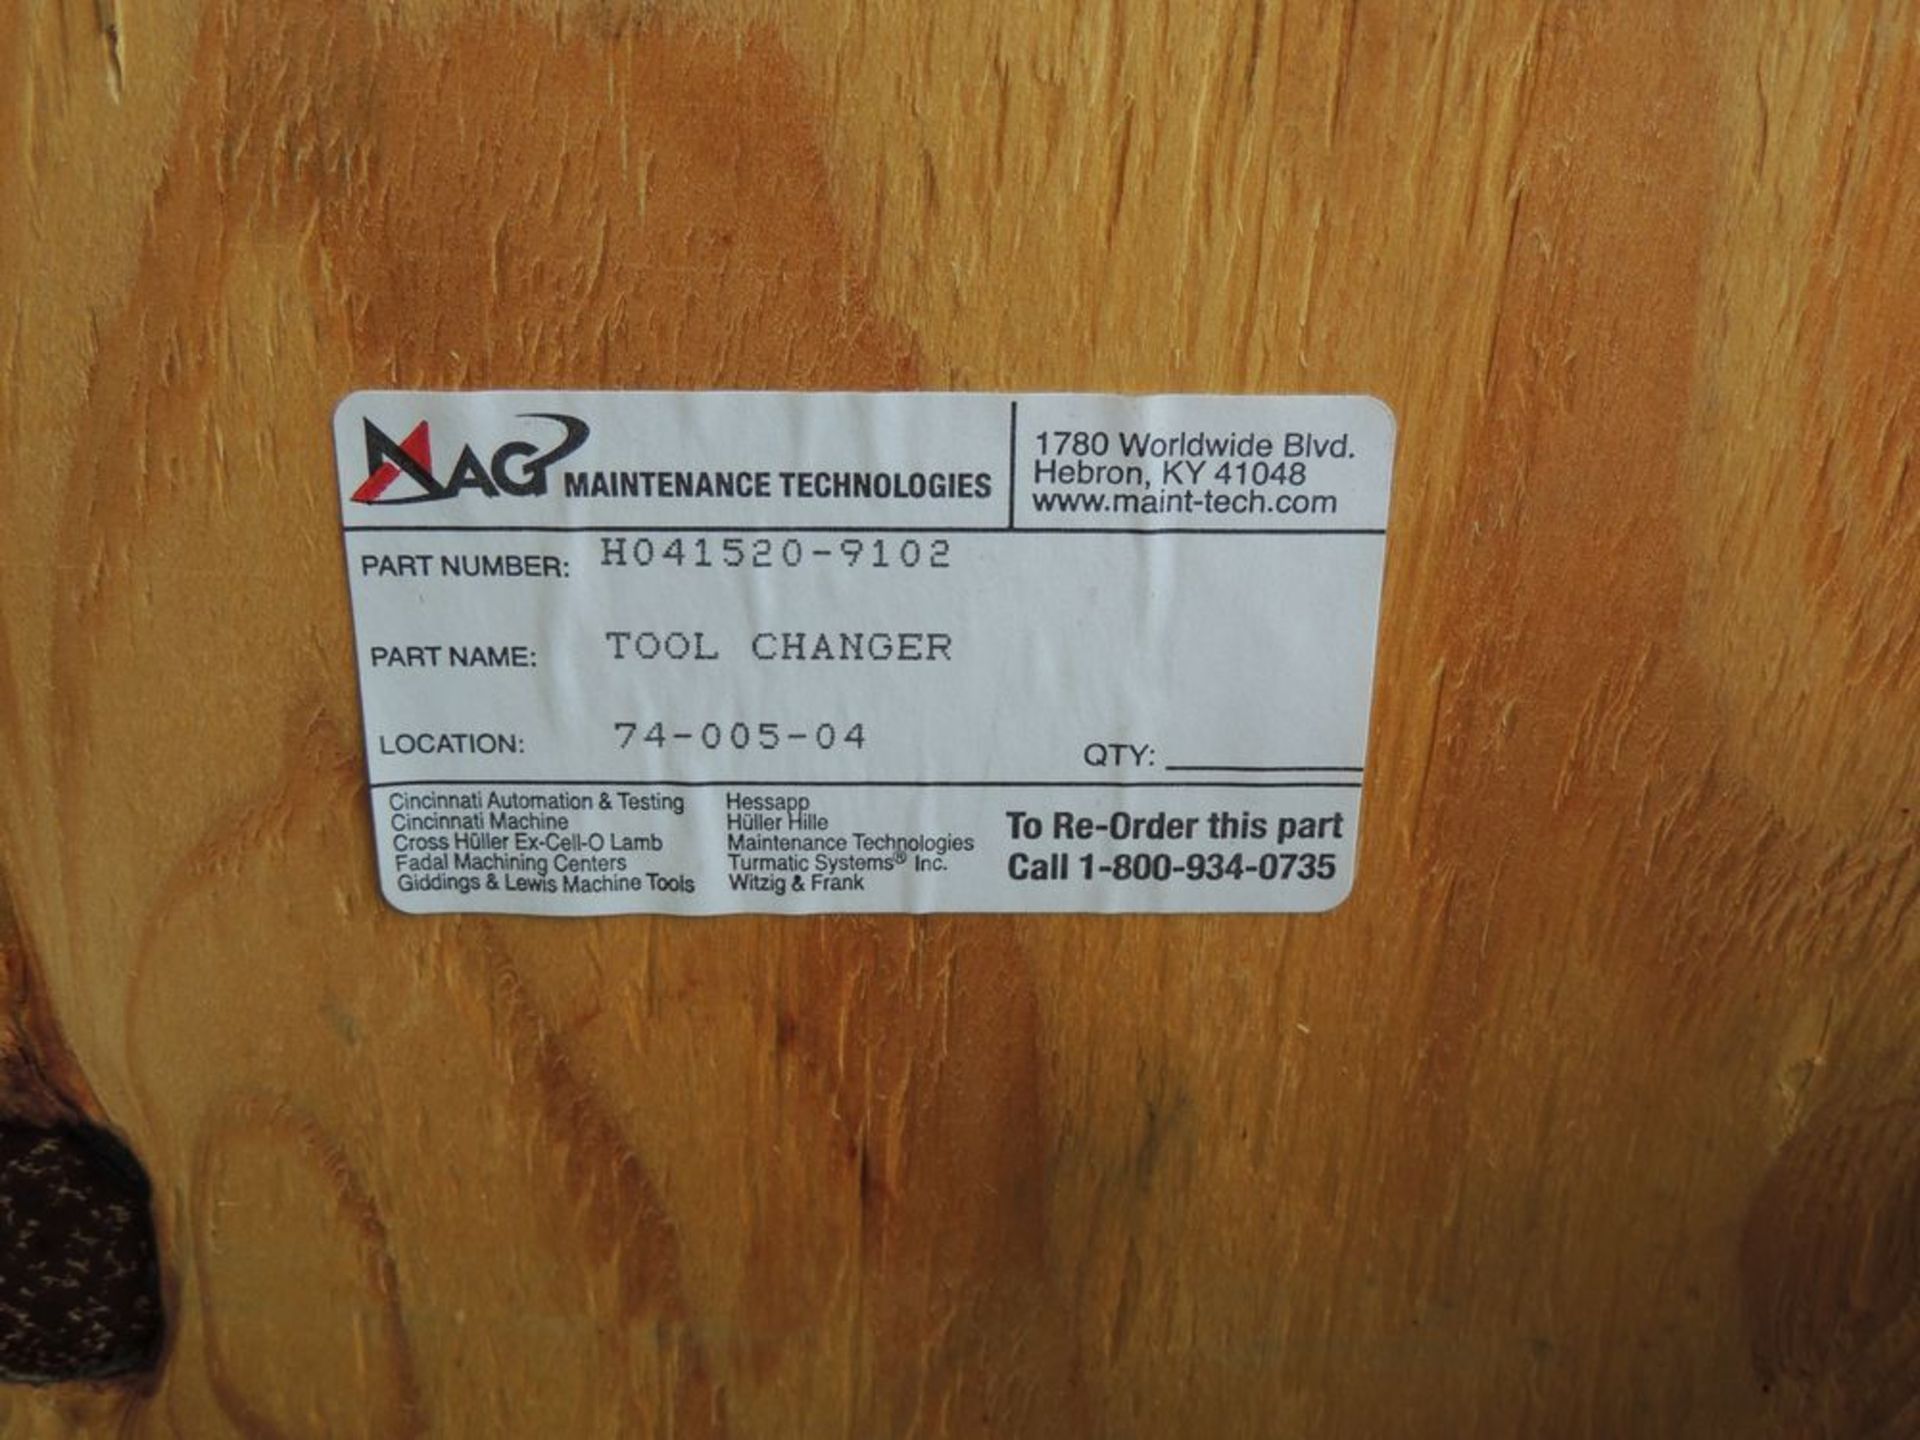 MAG TOOL CHANGER H041520-9102 - Image 3 of 3